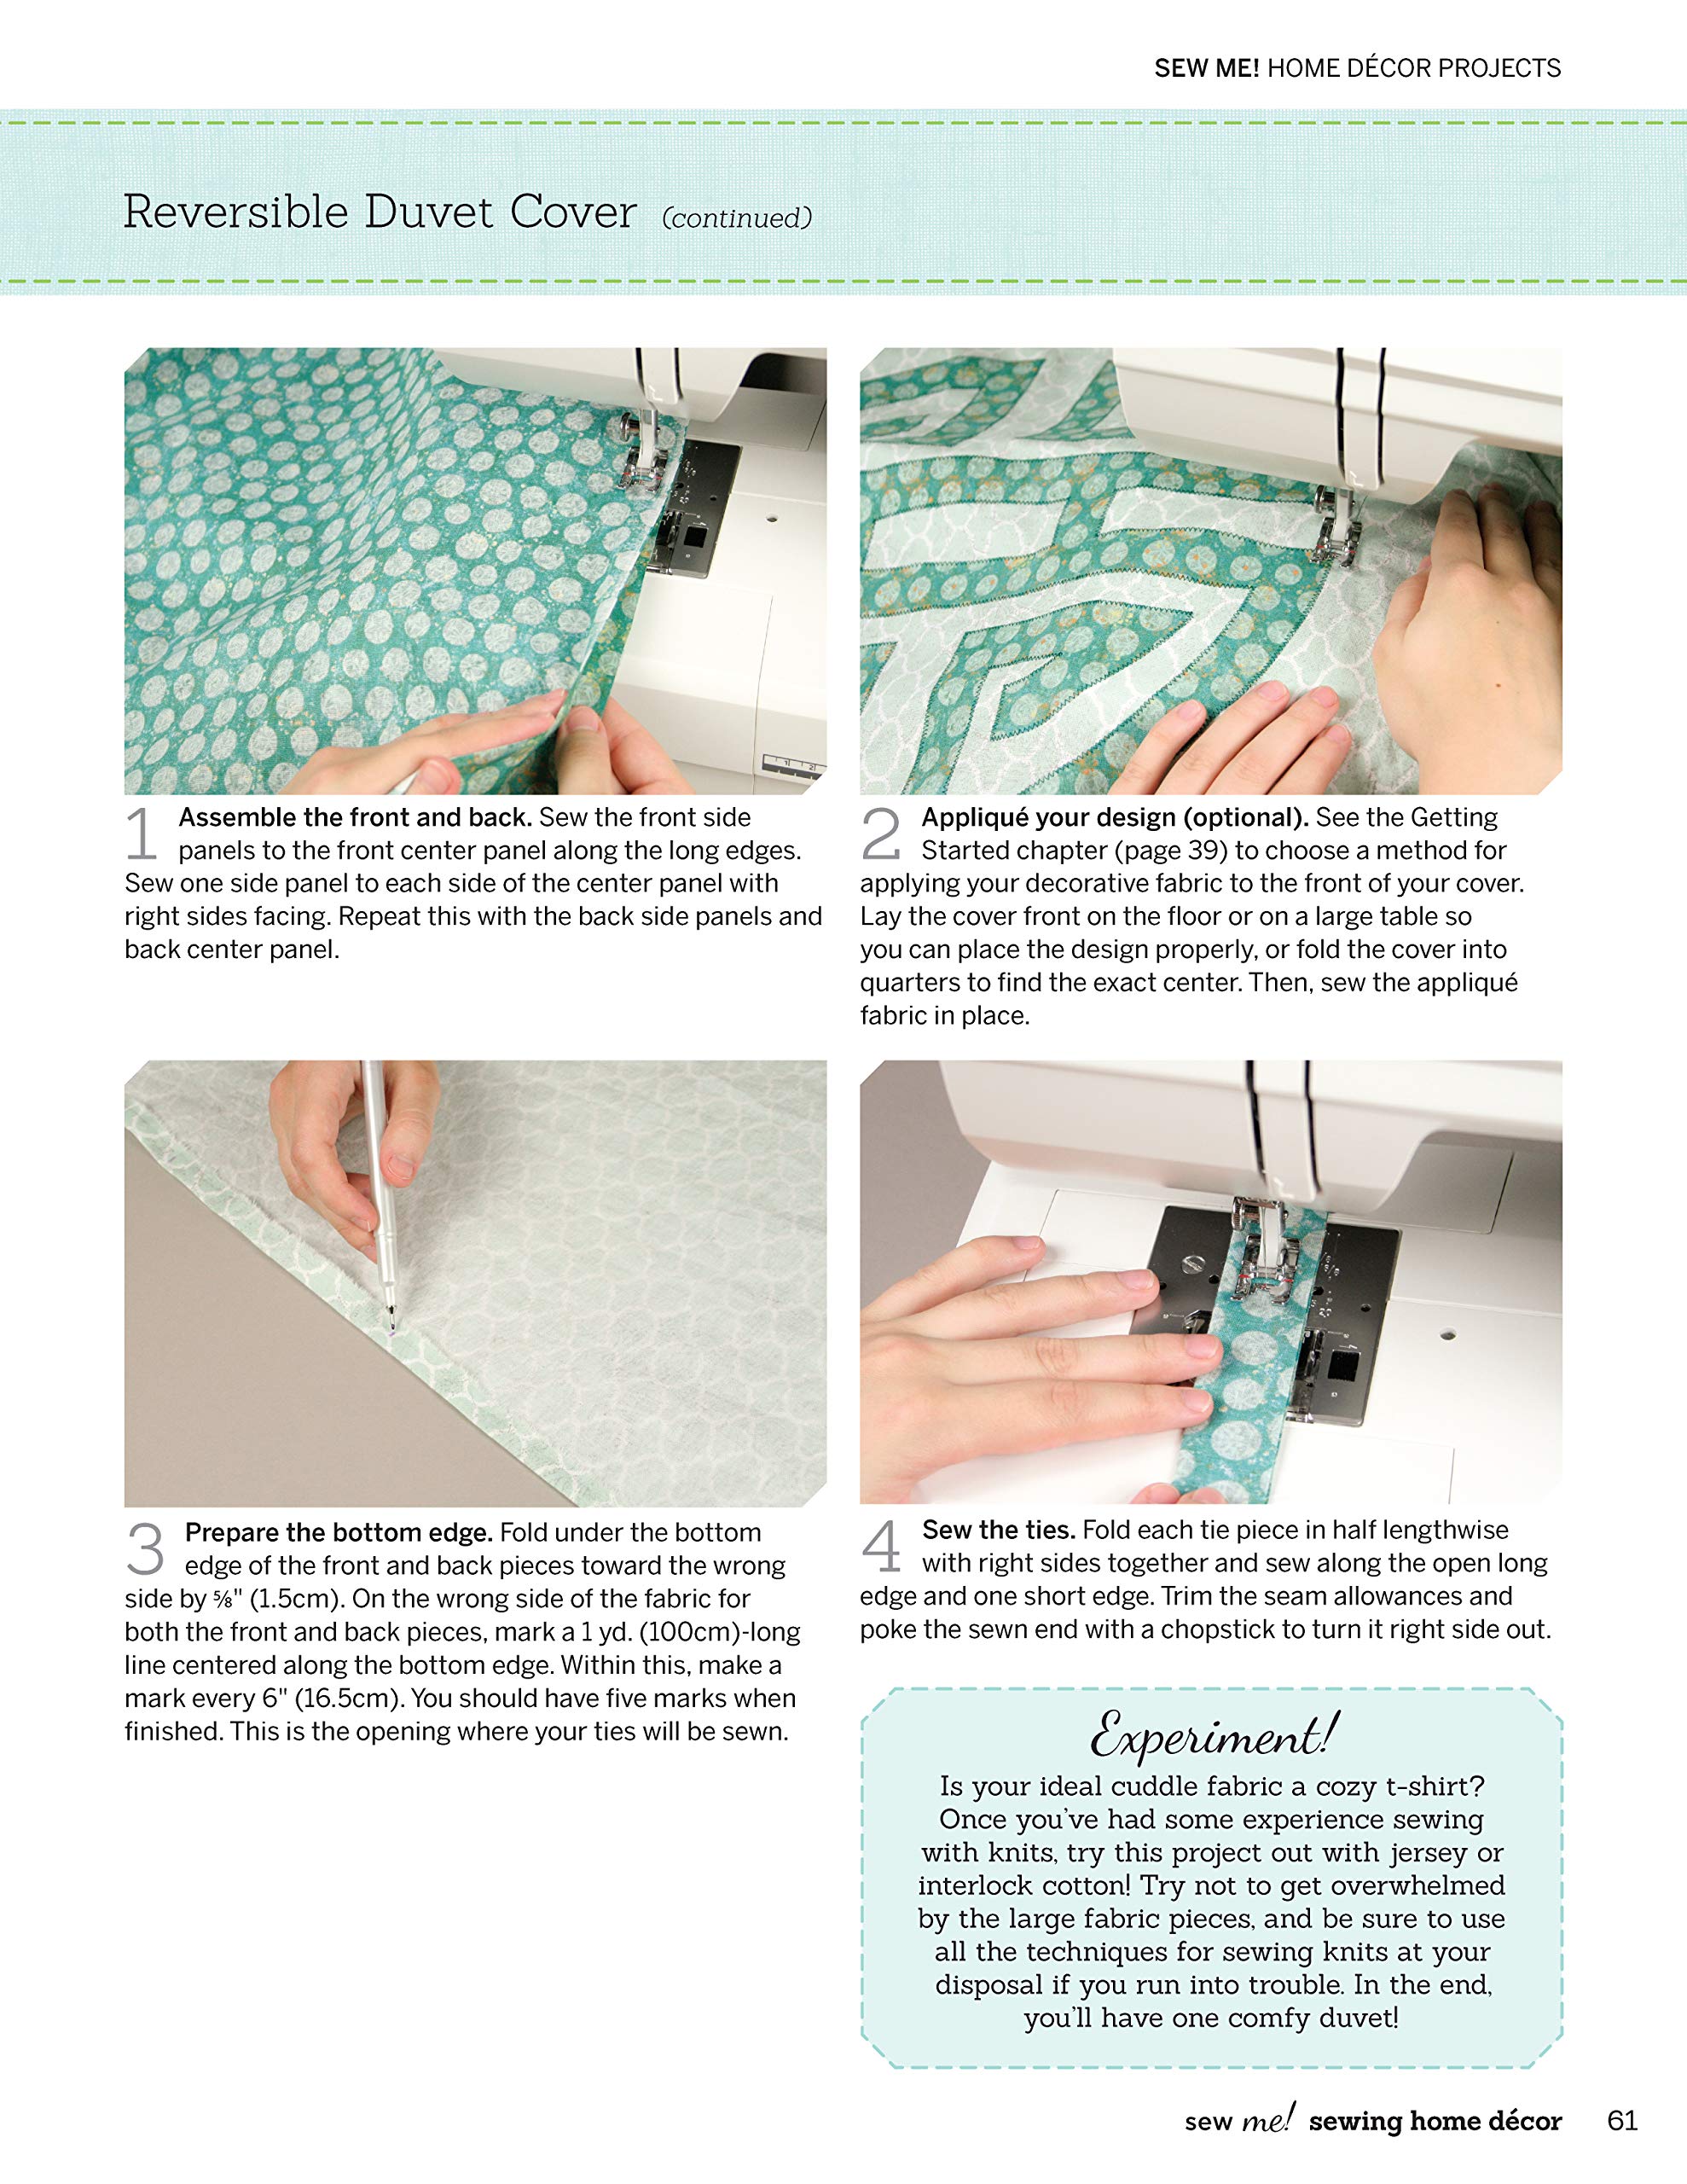 Sew Me! Sewing Home Decor: Easy-to-Make Curtains, Pillows, Organizers, and Other Accessories (Design Originals)